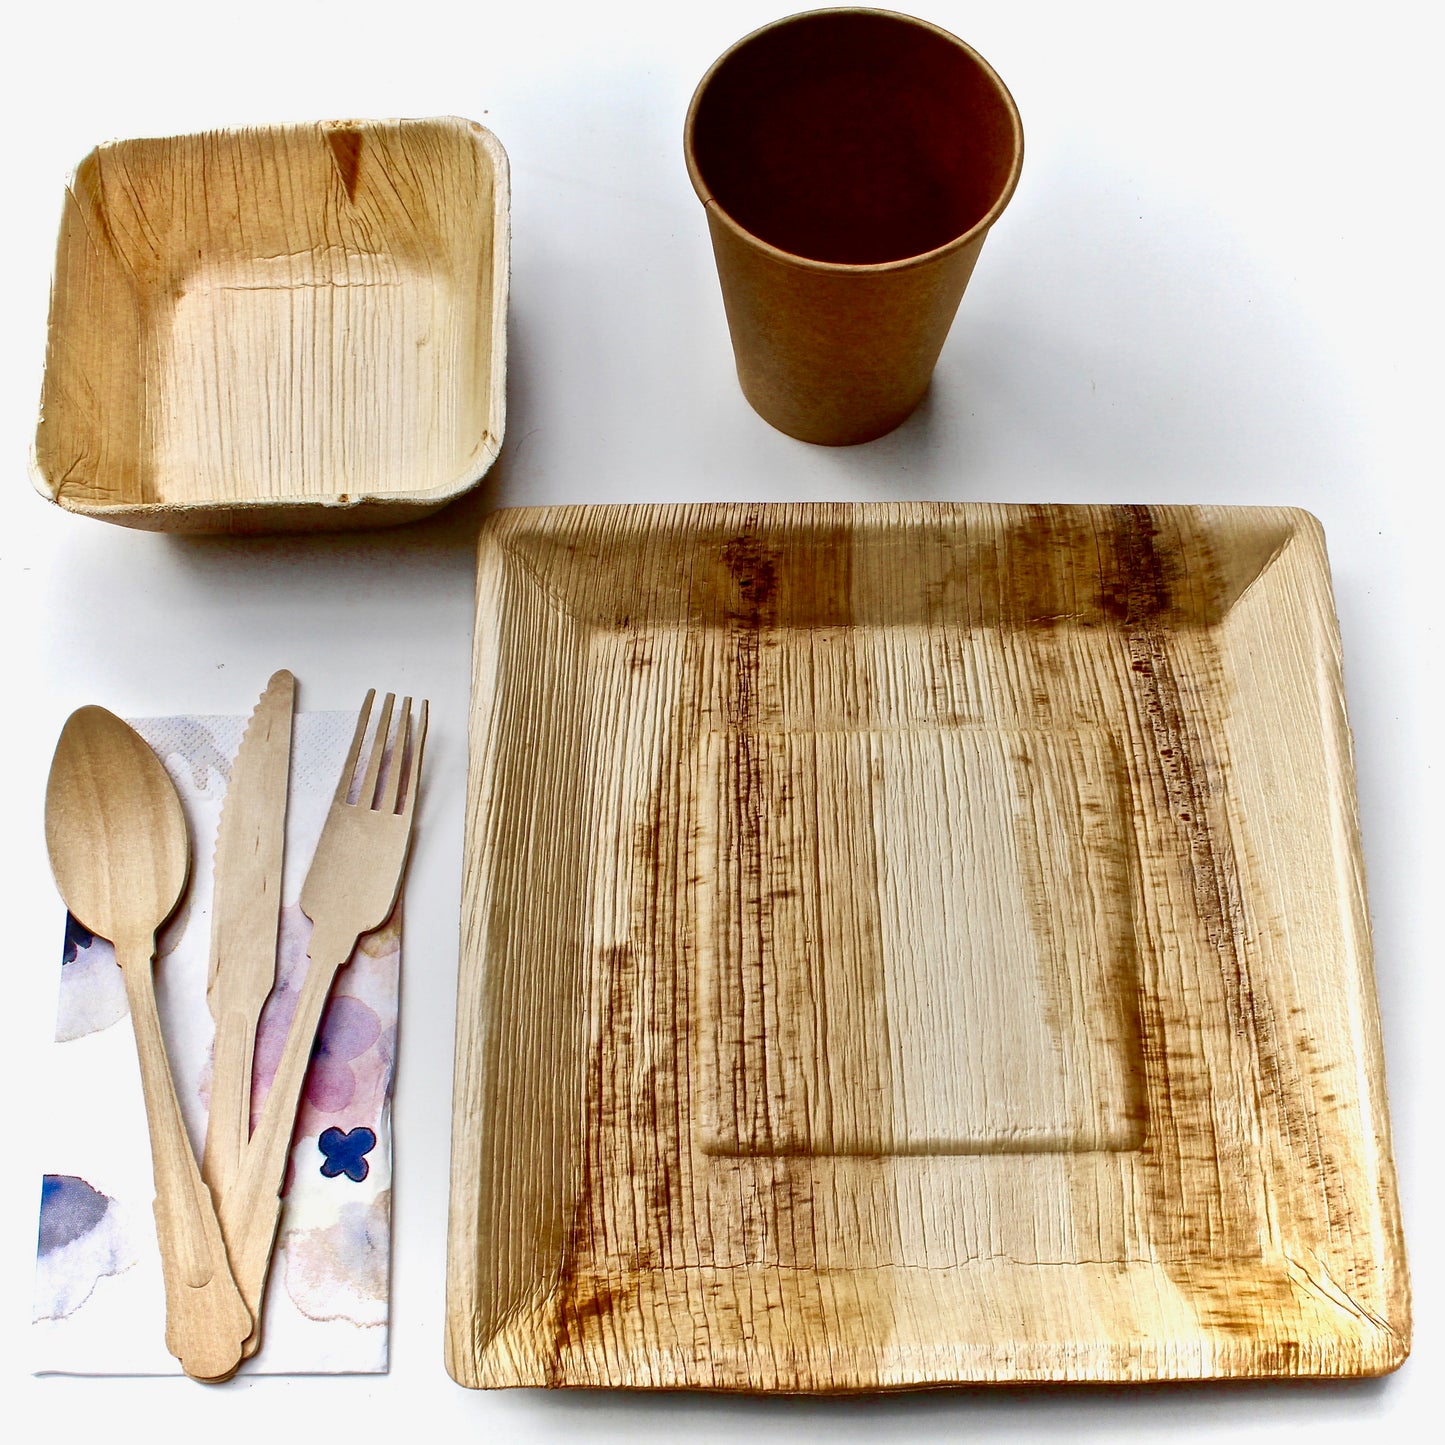 Palm leaf plate 25 pices deep Square 10"  - 25pic 6" square deep and 75 pic cutlery eco frindly - biodegrable - disposable - compostable